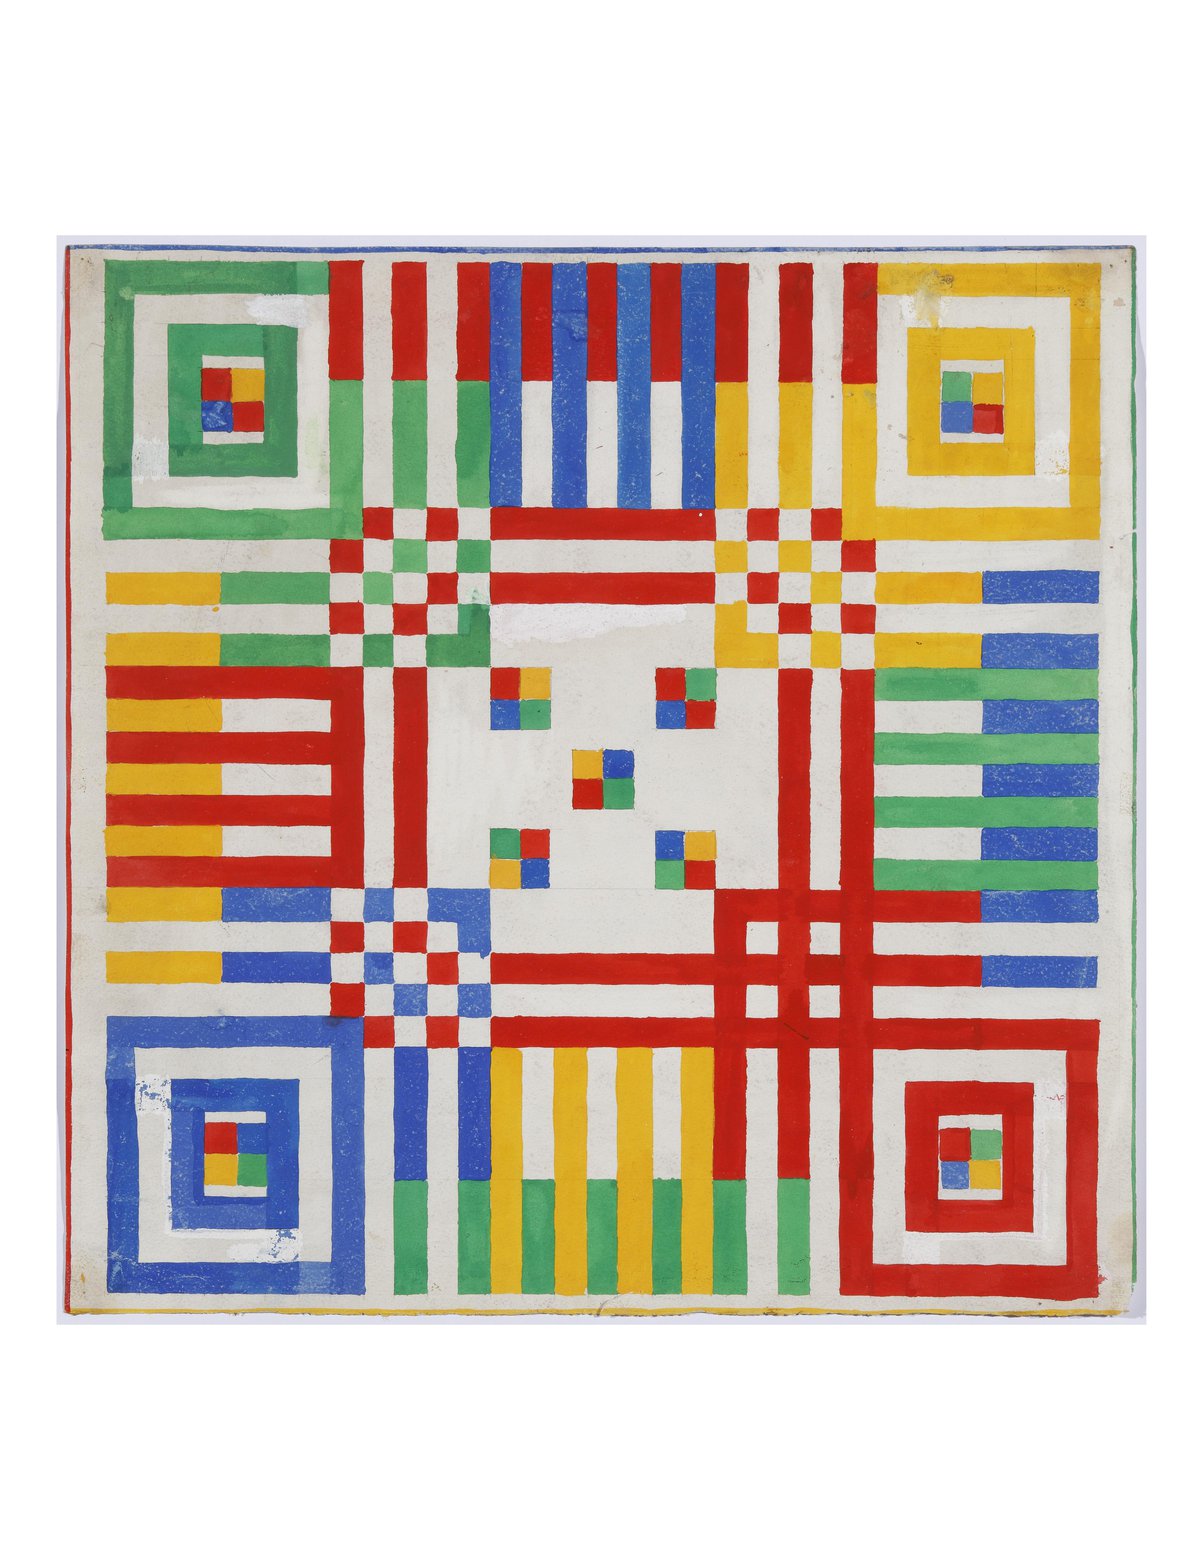 Anna AndreevaGeometric Pattern “Formulas” (Q-R Code), 1970sInk and gouache on paper52 x 52 cm